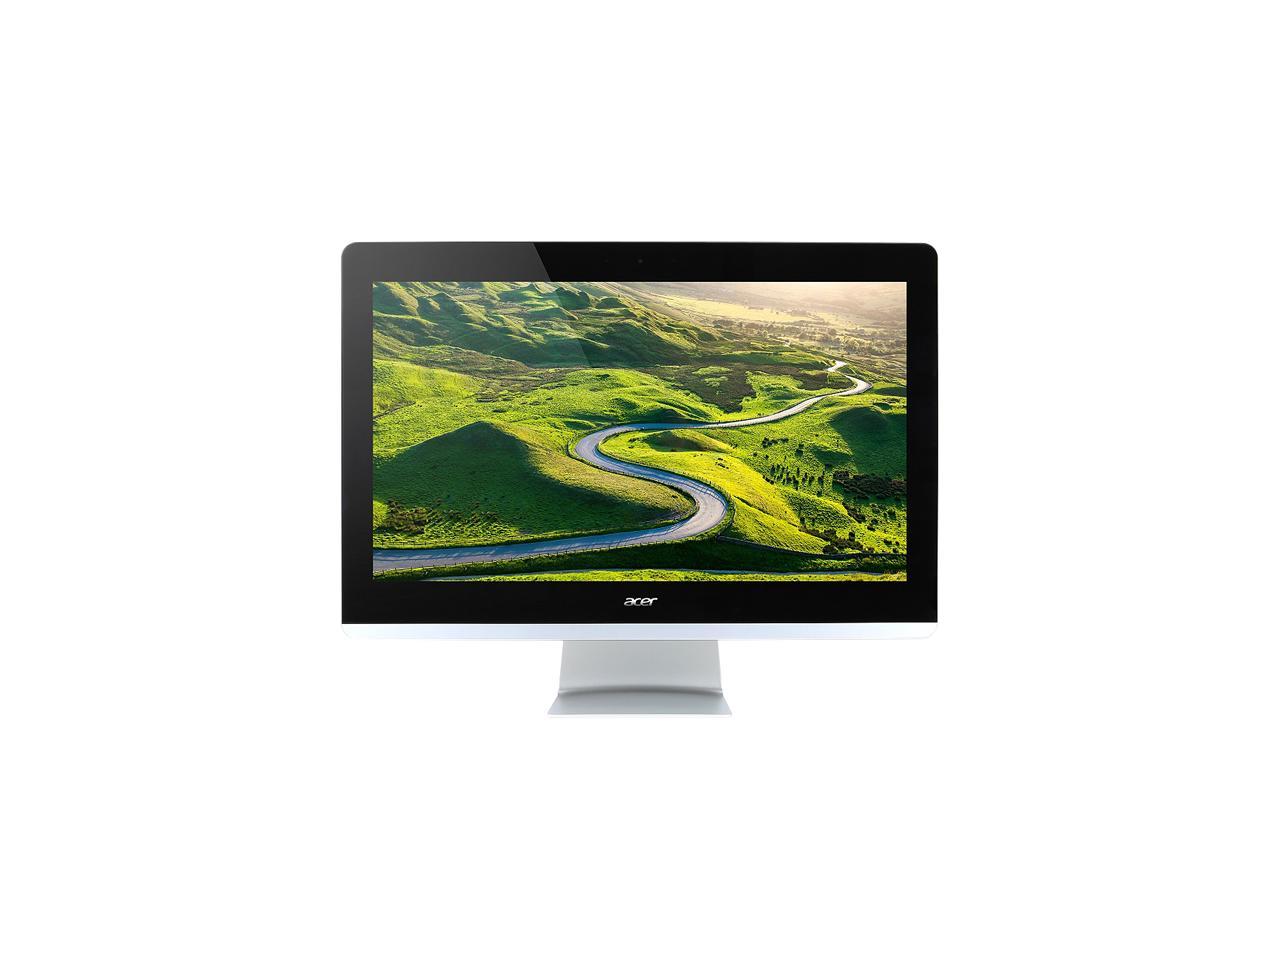 Refurbished: Acer All-in-One Computer Aspire Z AZ3-715-UR53 Intel Core